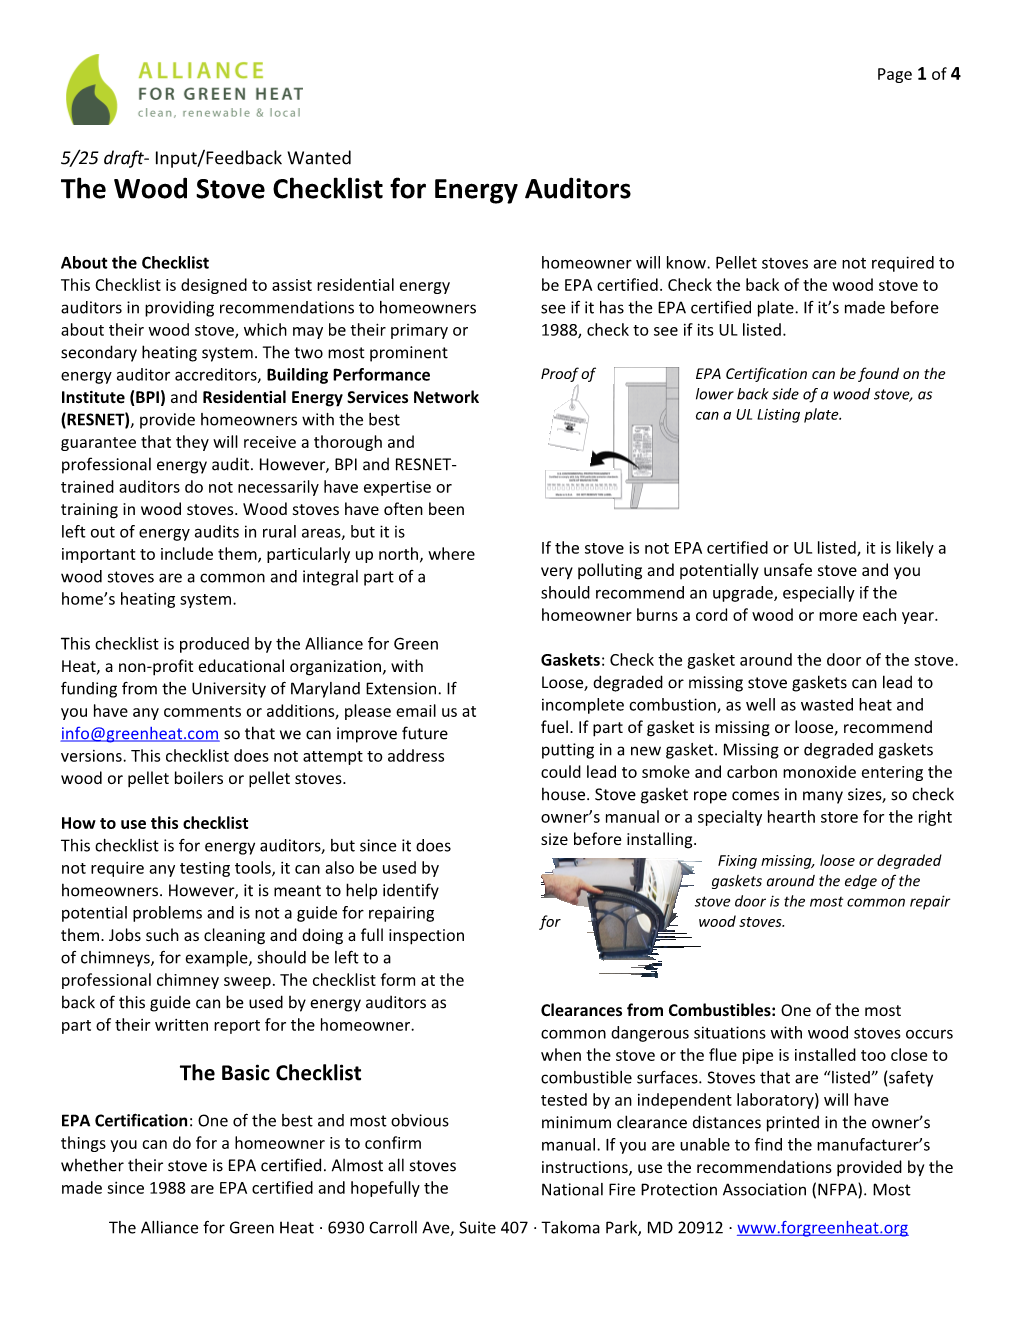 The Wood Stove Checklistfor Energy Auditors